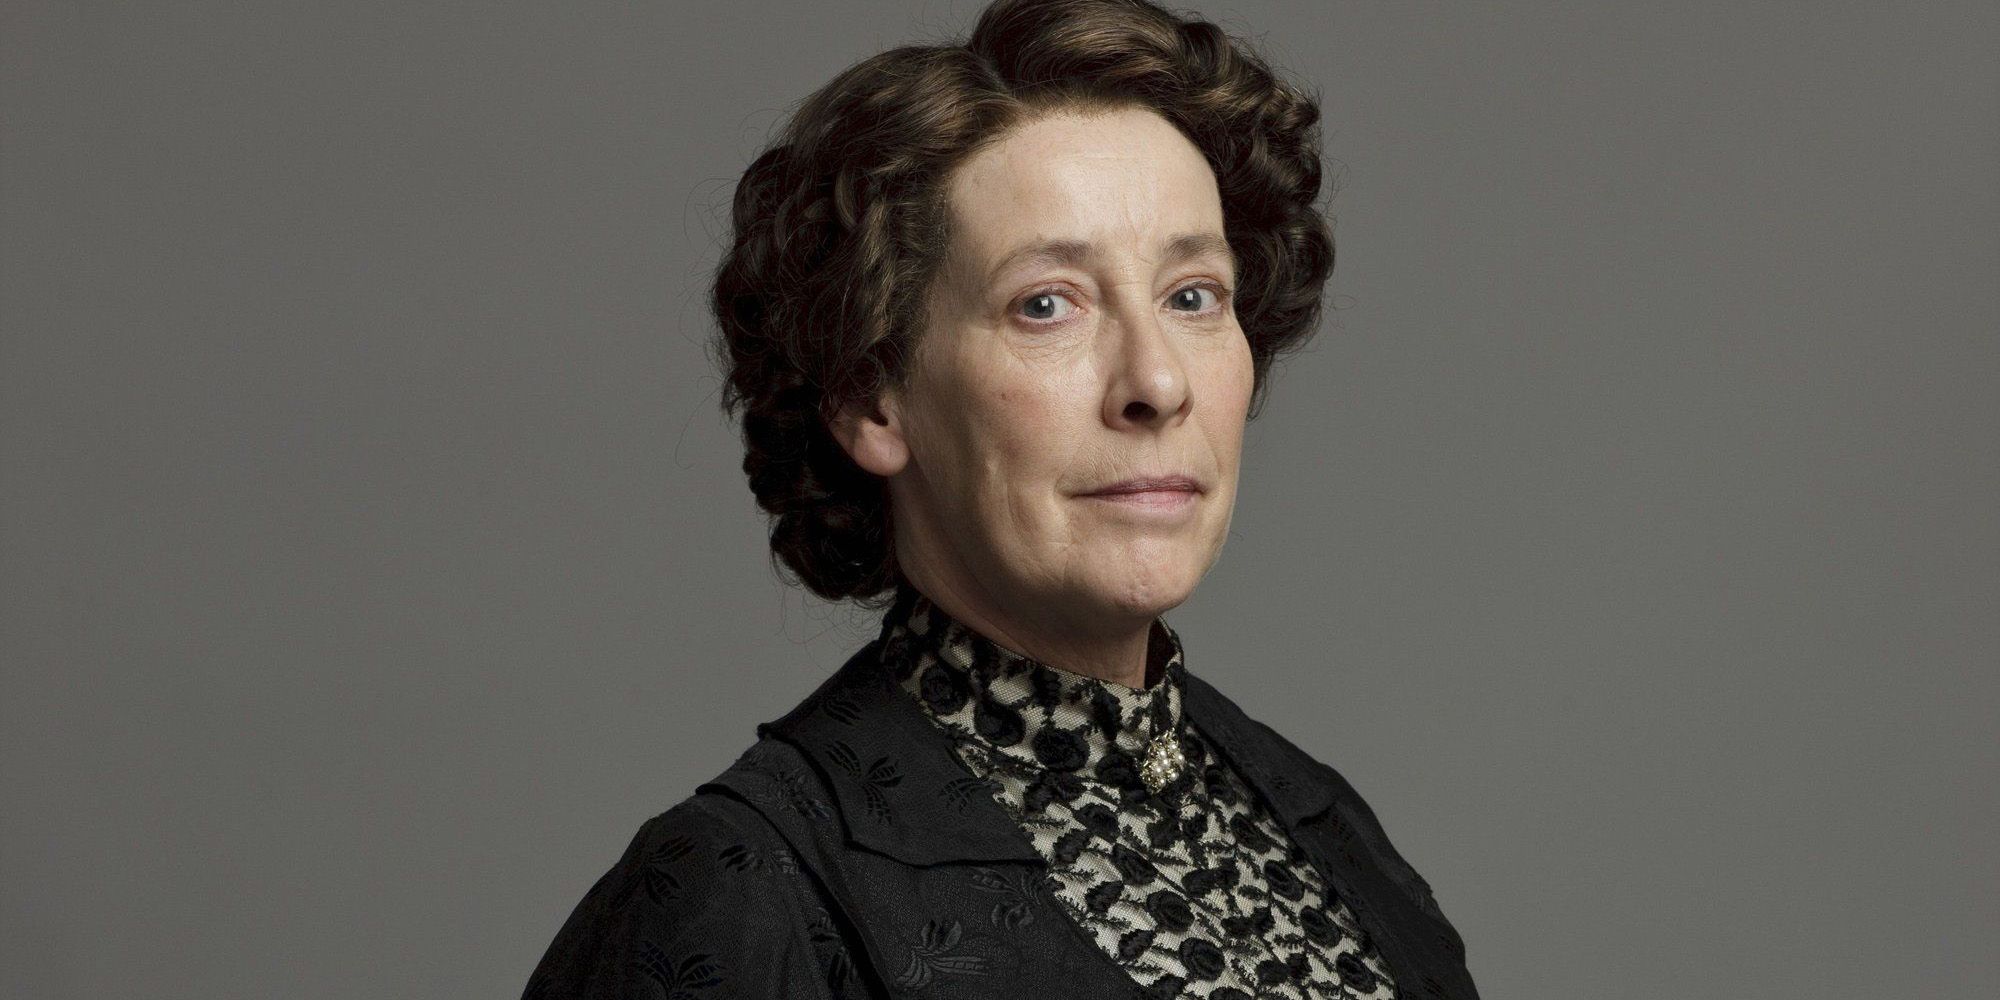 Downton Abbey: Every Servant, Ranked On How Good They Are At Their Job